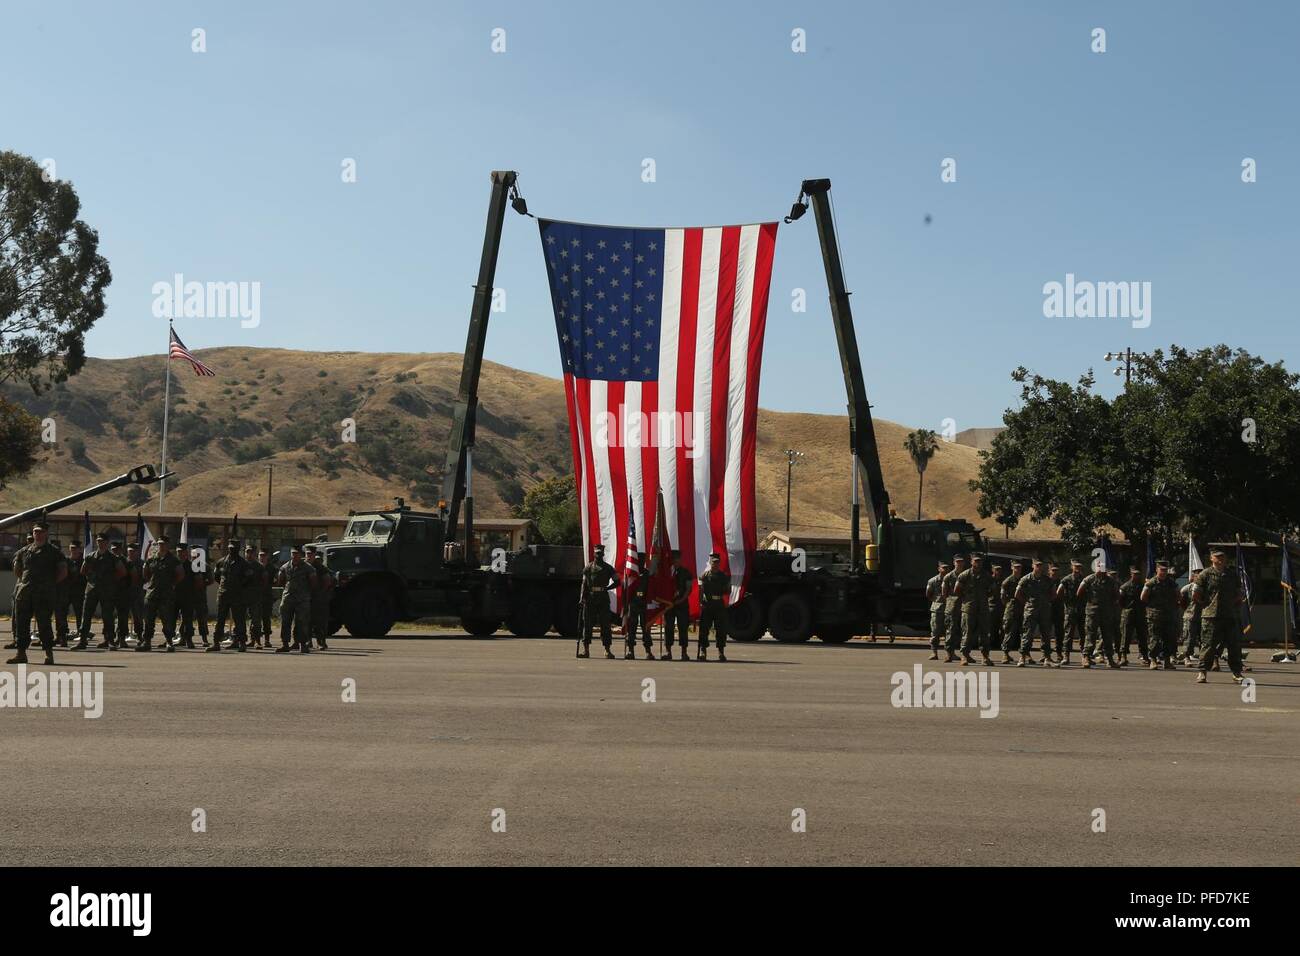 U.S. Marines with 11th Marine Regiment, 1st Marine Division, stand in formation during a retirement ceremony at Marine Corps Base Camp Pendleton, Calif., June 7, 2018. The ceremony was held in honor of Chief Warrant Officer 5 David C. Thomas for his 30 years of meritorious service. Stock Photo